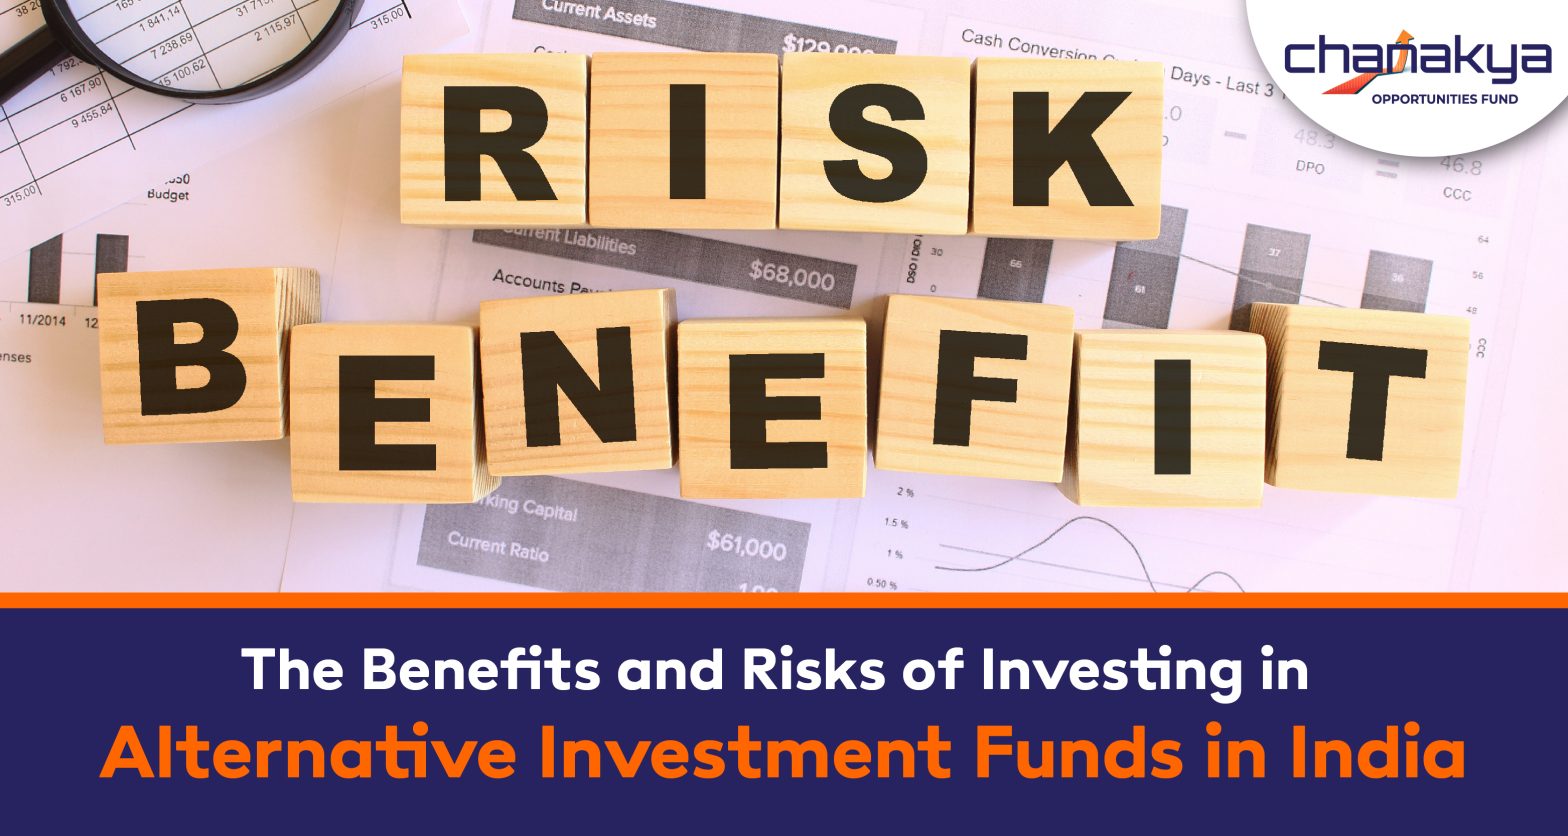 The Benefits and Risks of Investing in Alternative Investment Funds in India